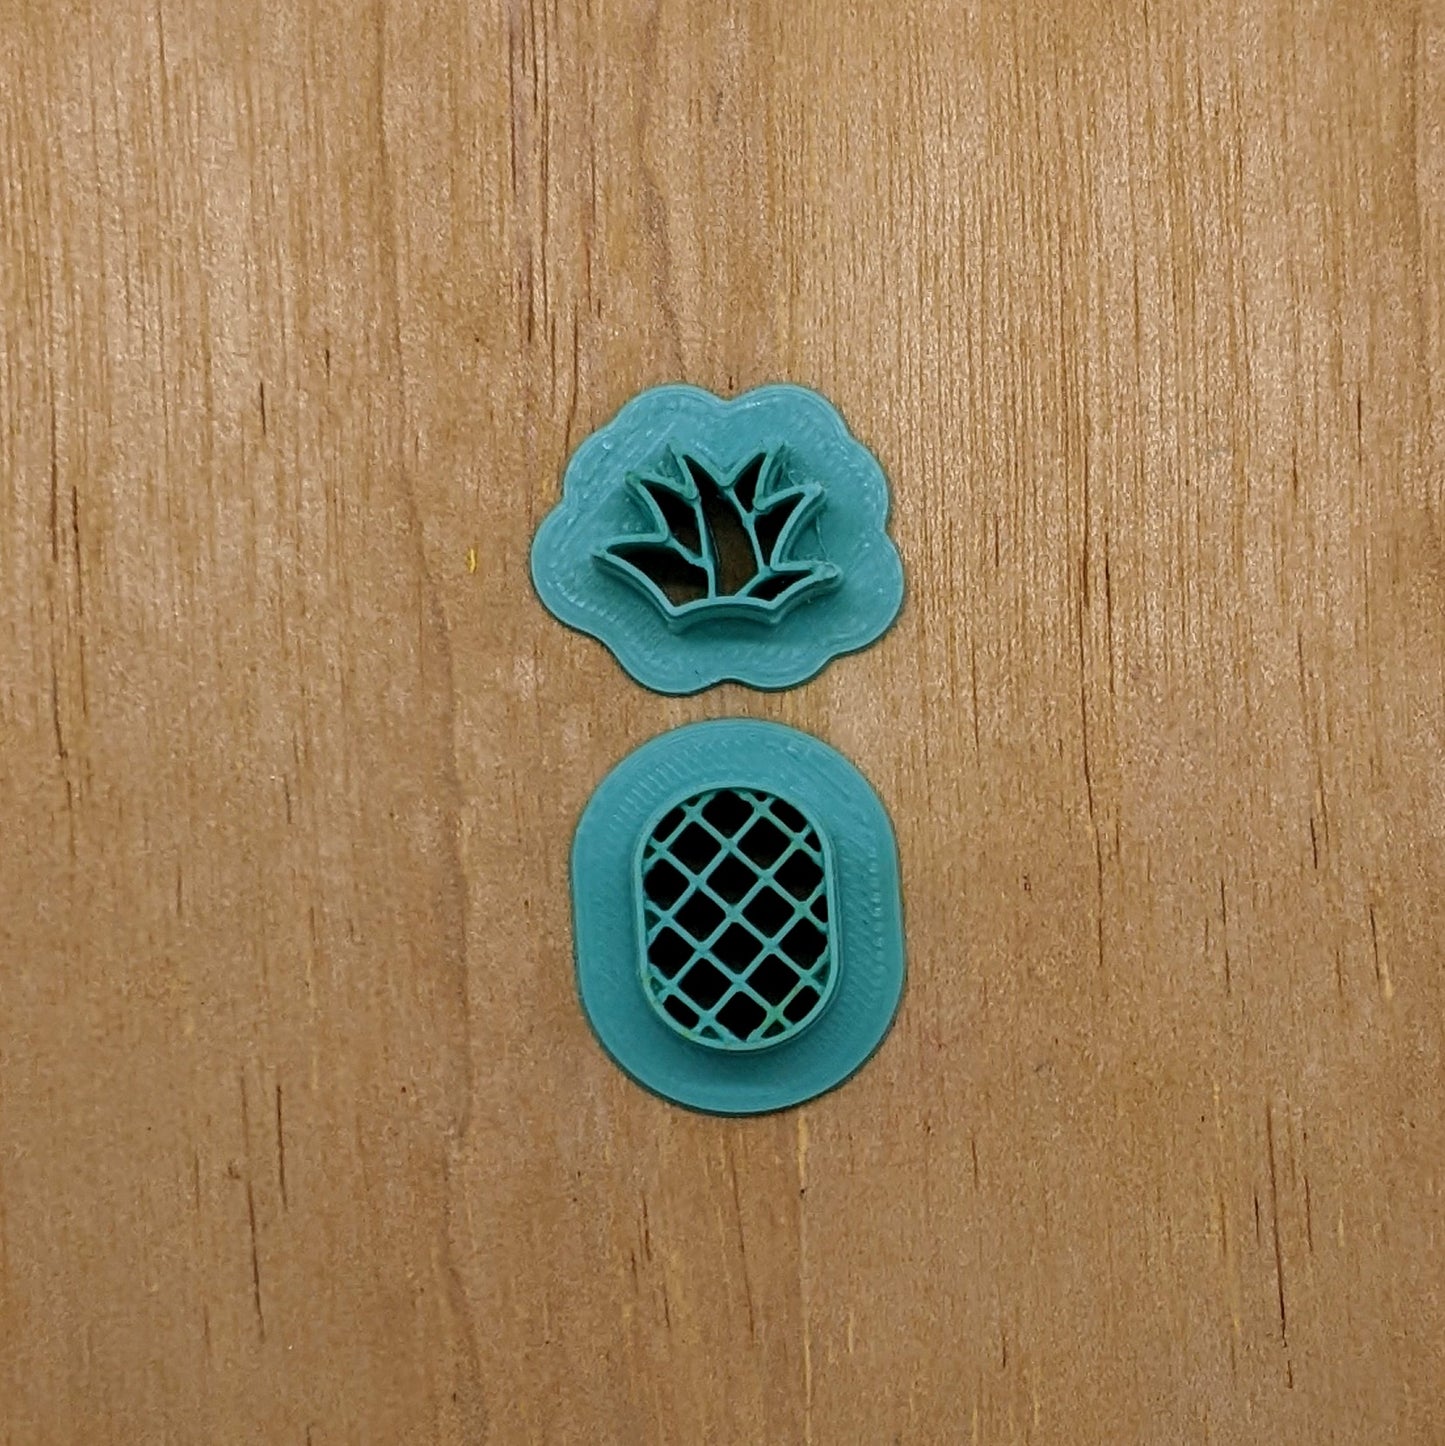 Pineapple and Leaves 2-Piece Cookie Cutter Set - Ideal for Ceramics, Pottery, Cookies, Polymer Clay, Fondant, and More